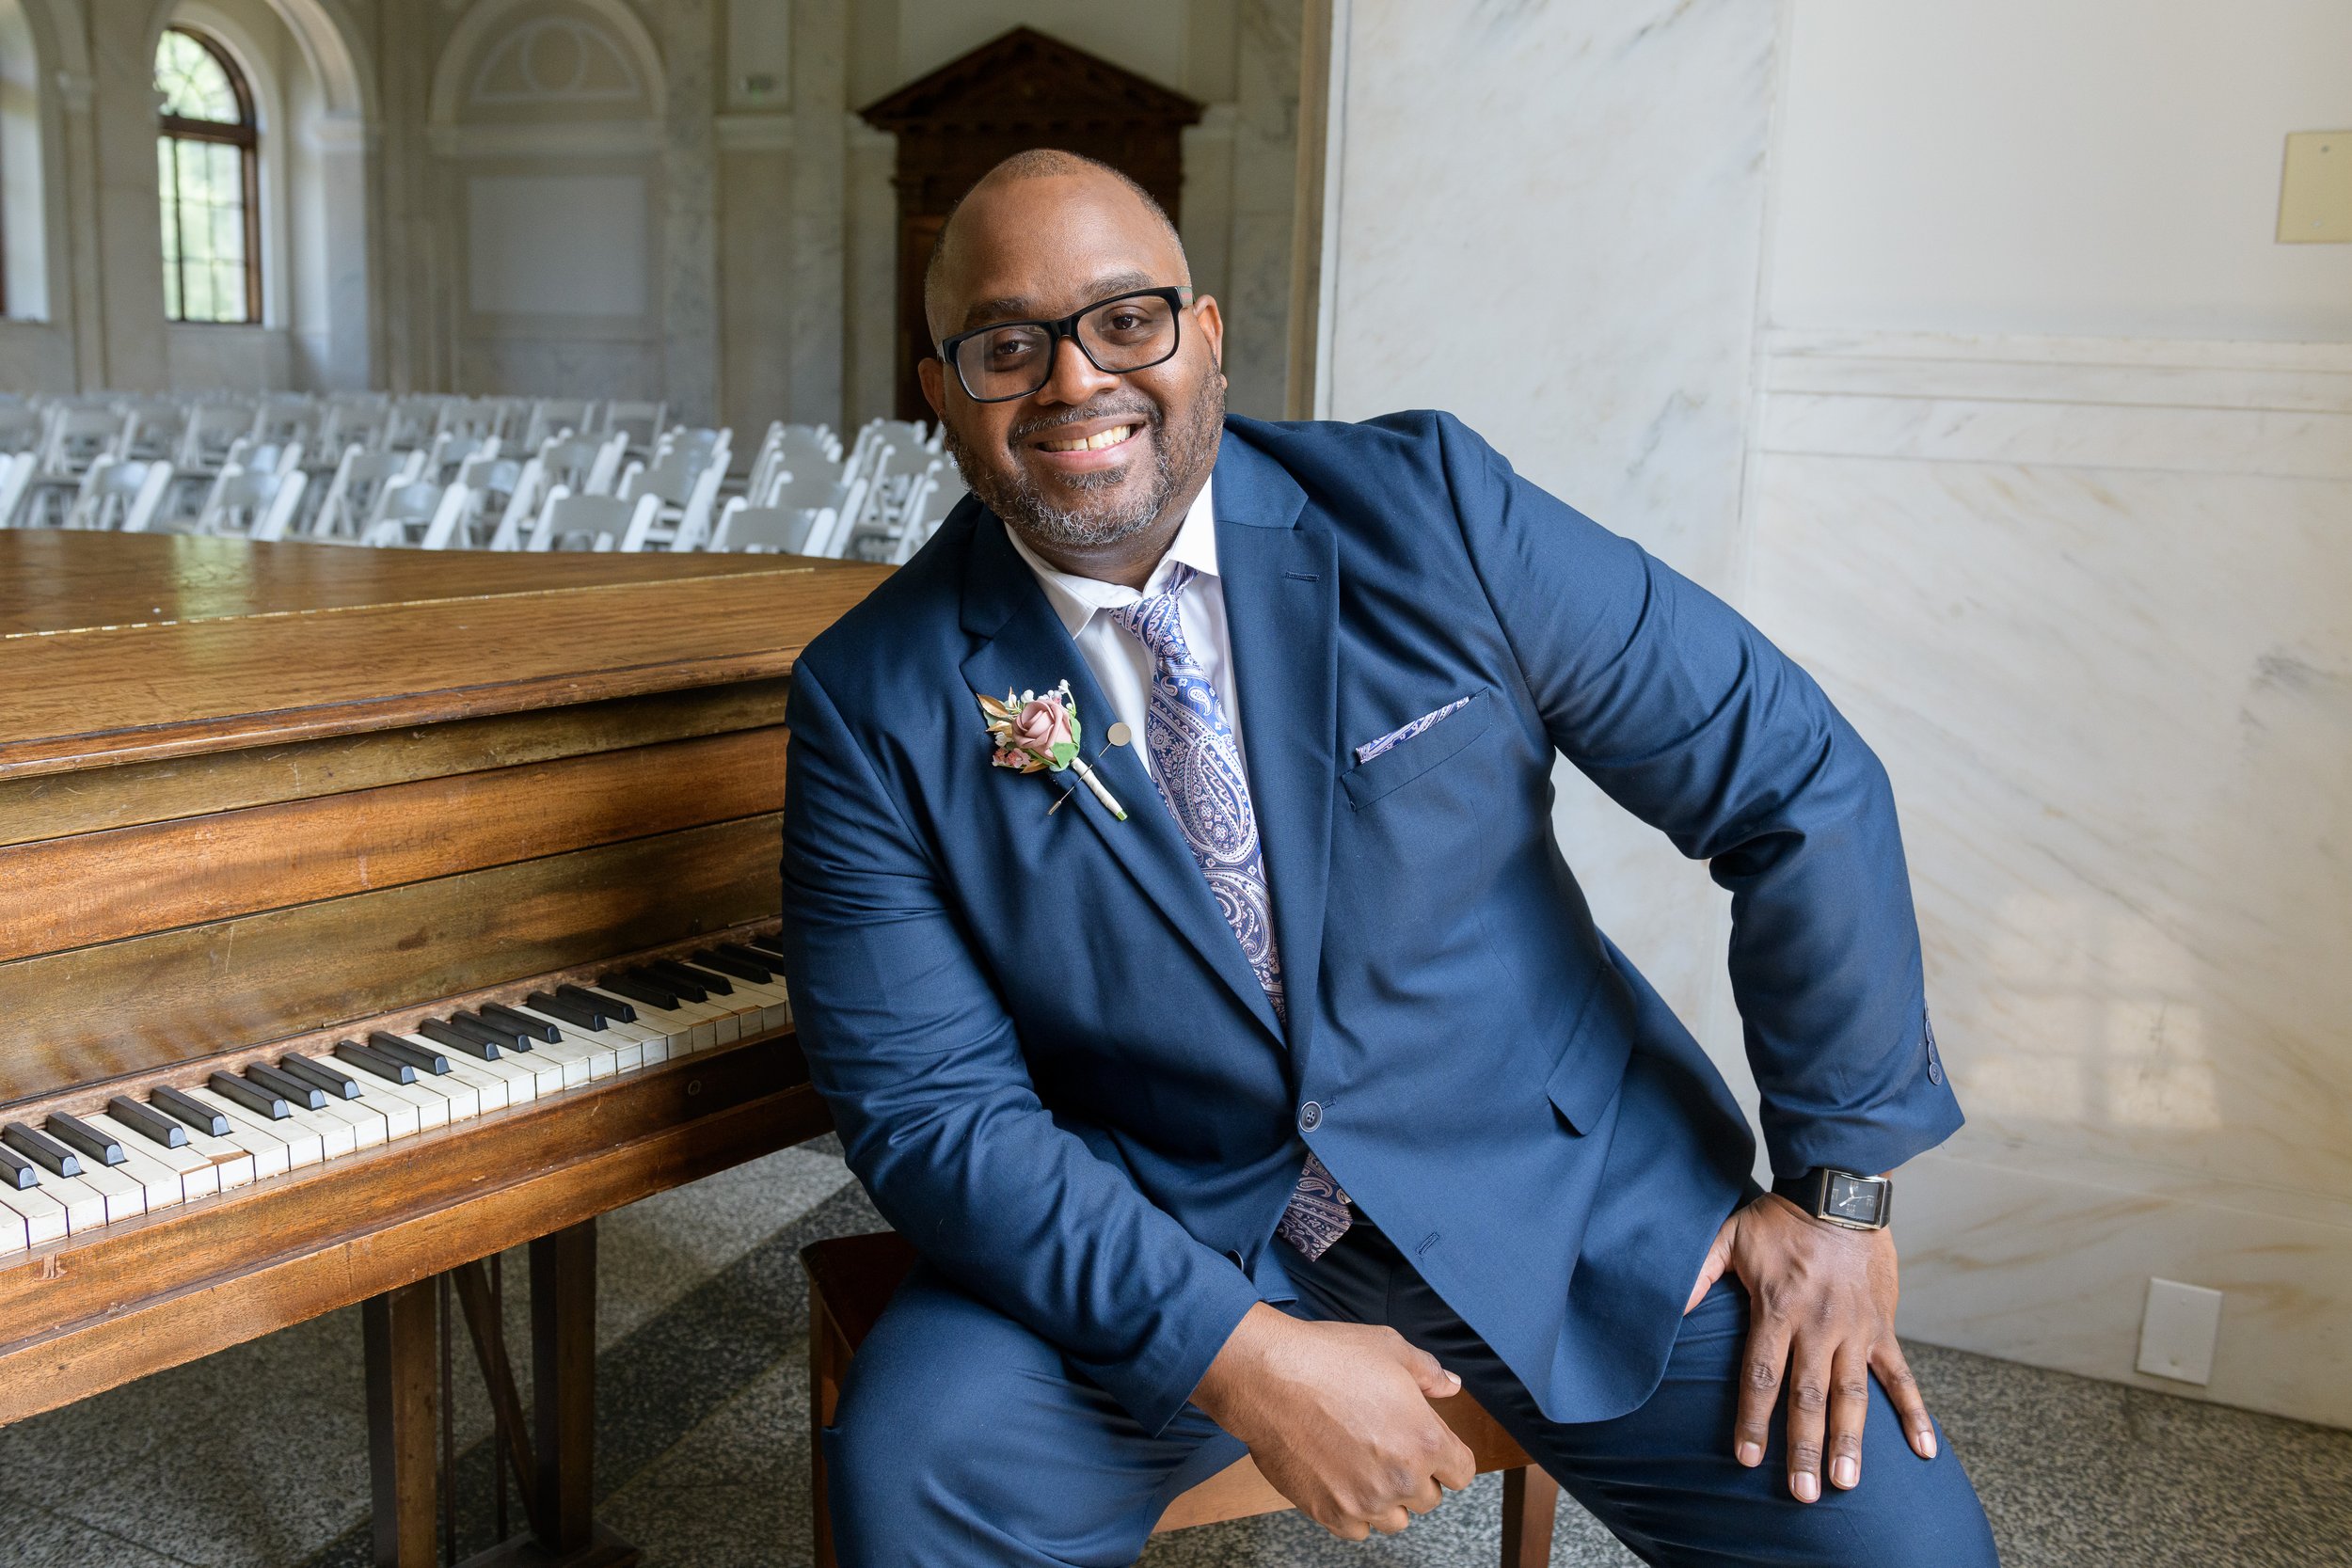 Groom smiles as he sits on piano bench of antique baby grand piano at this Dekalb Courthouse wedding in Decatur, GA